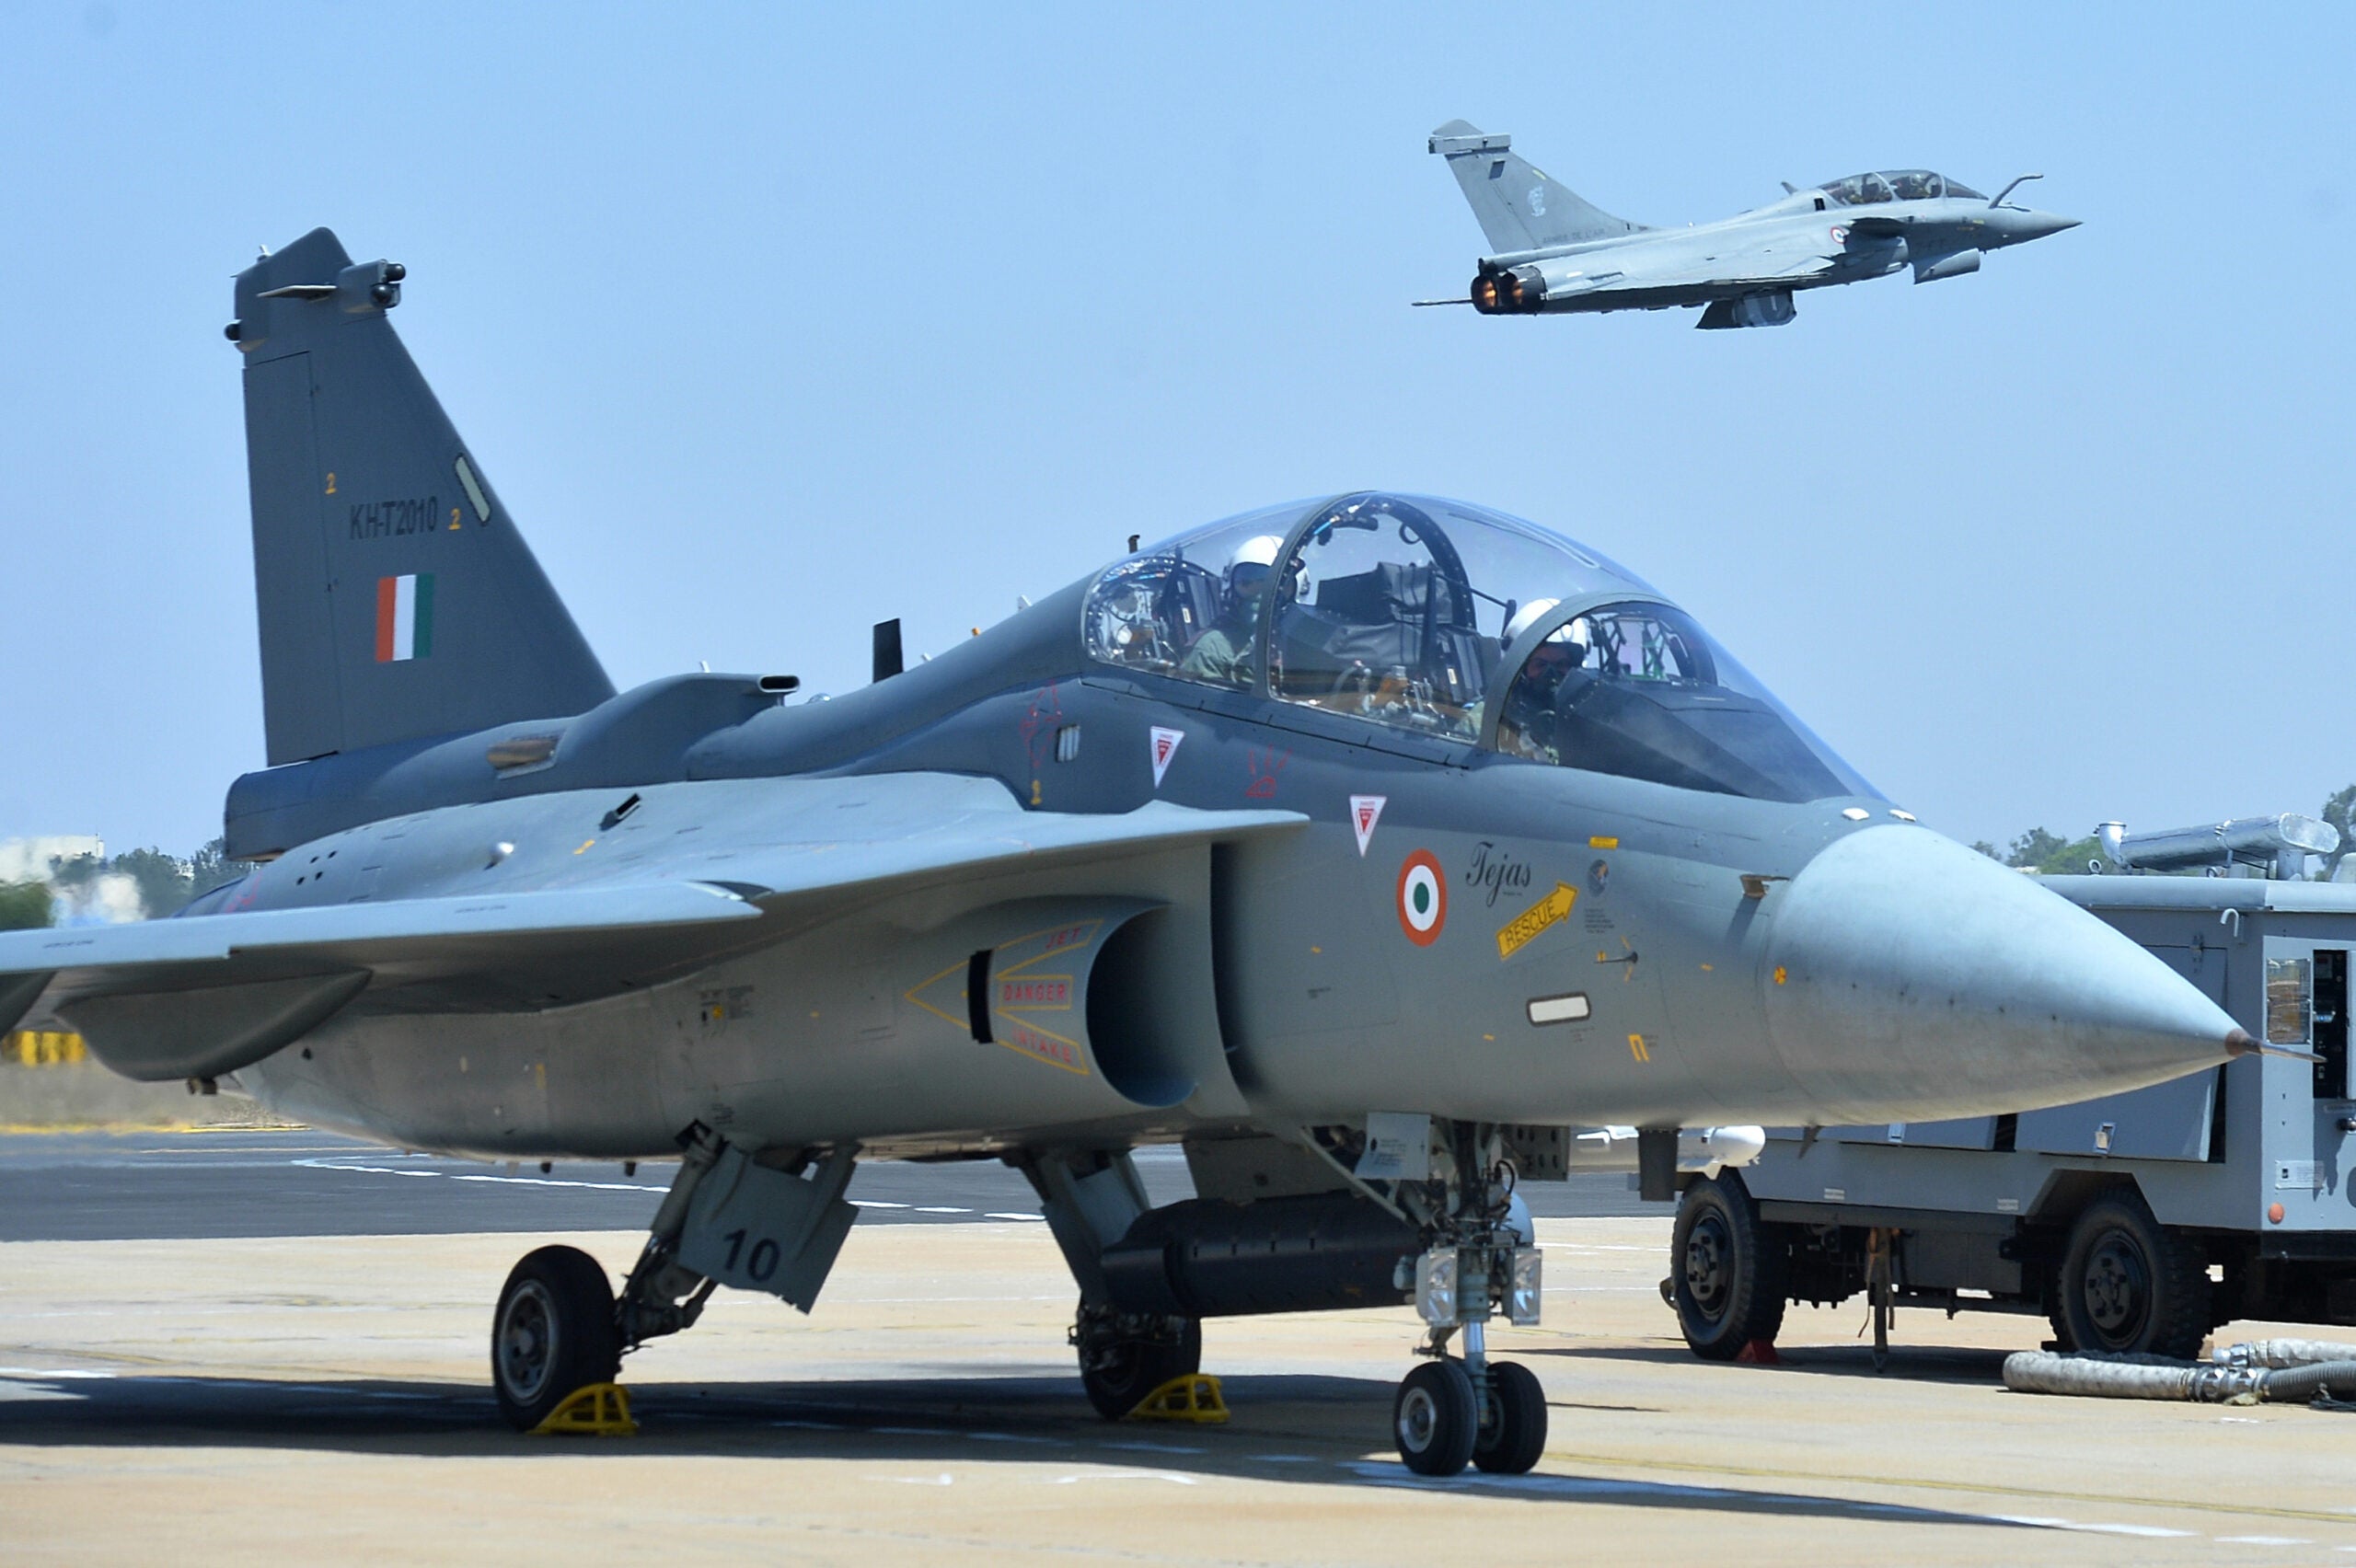 A French Rafale fighter flies over an Indian Airforce Tejas Aircraft with Bipin Rawat, the 27th Chief of Army Staff of the Indian Army on board in the co-pilot seat before take off during the Aero India airshow at the Yelahanka Air Force station, in Bangalore on February 21, 2019. - The Aero India 2019 airshow starts on February 20 and ends on February 24. (Photo by MANJUNATH KIRAN / AFP)        (Photo credit should read MANJUNATH KIRAN/AFP via Getty Images)